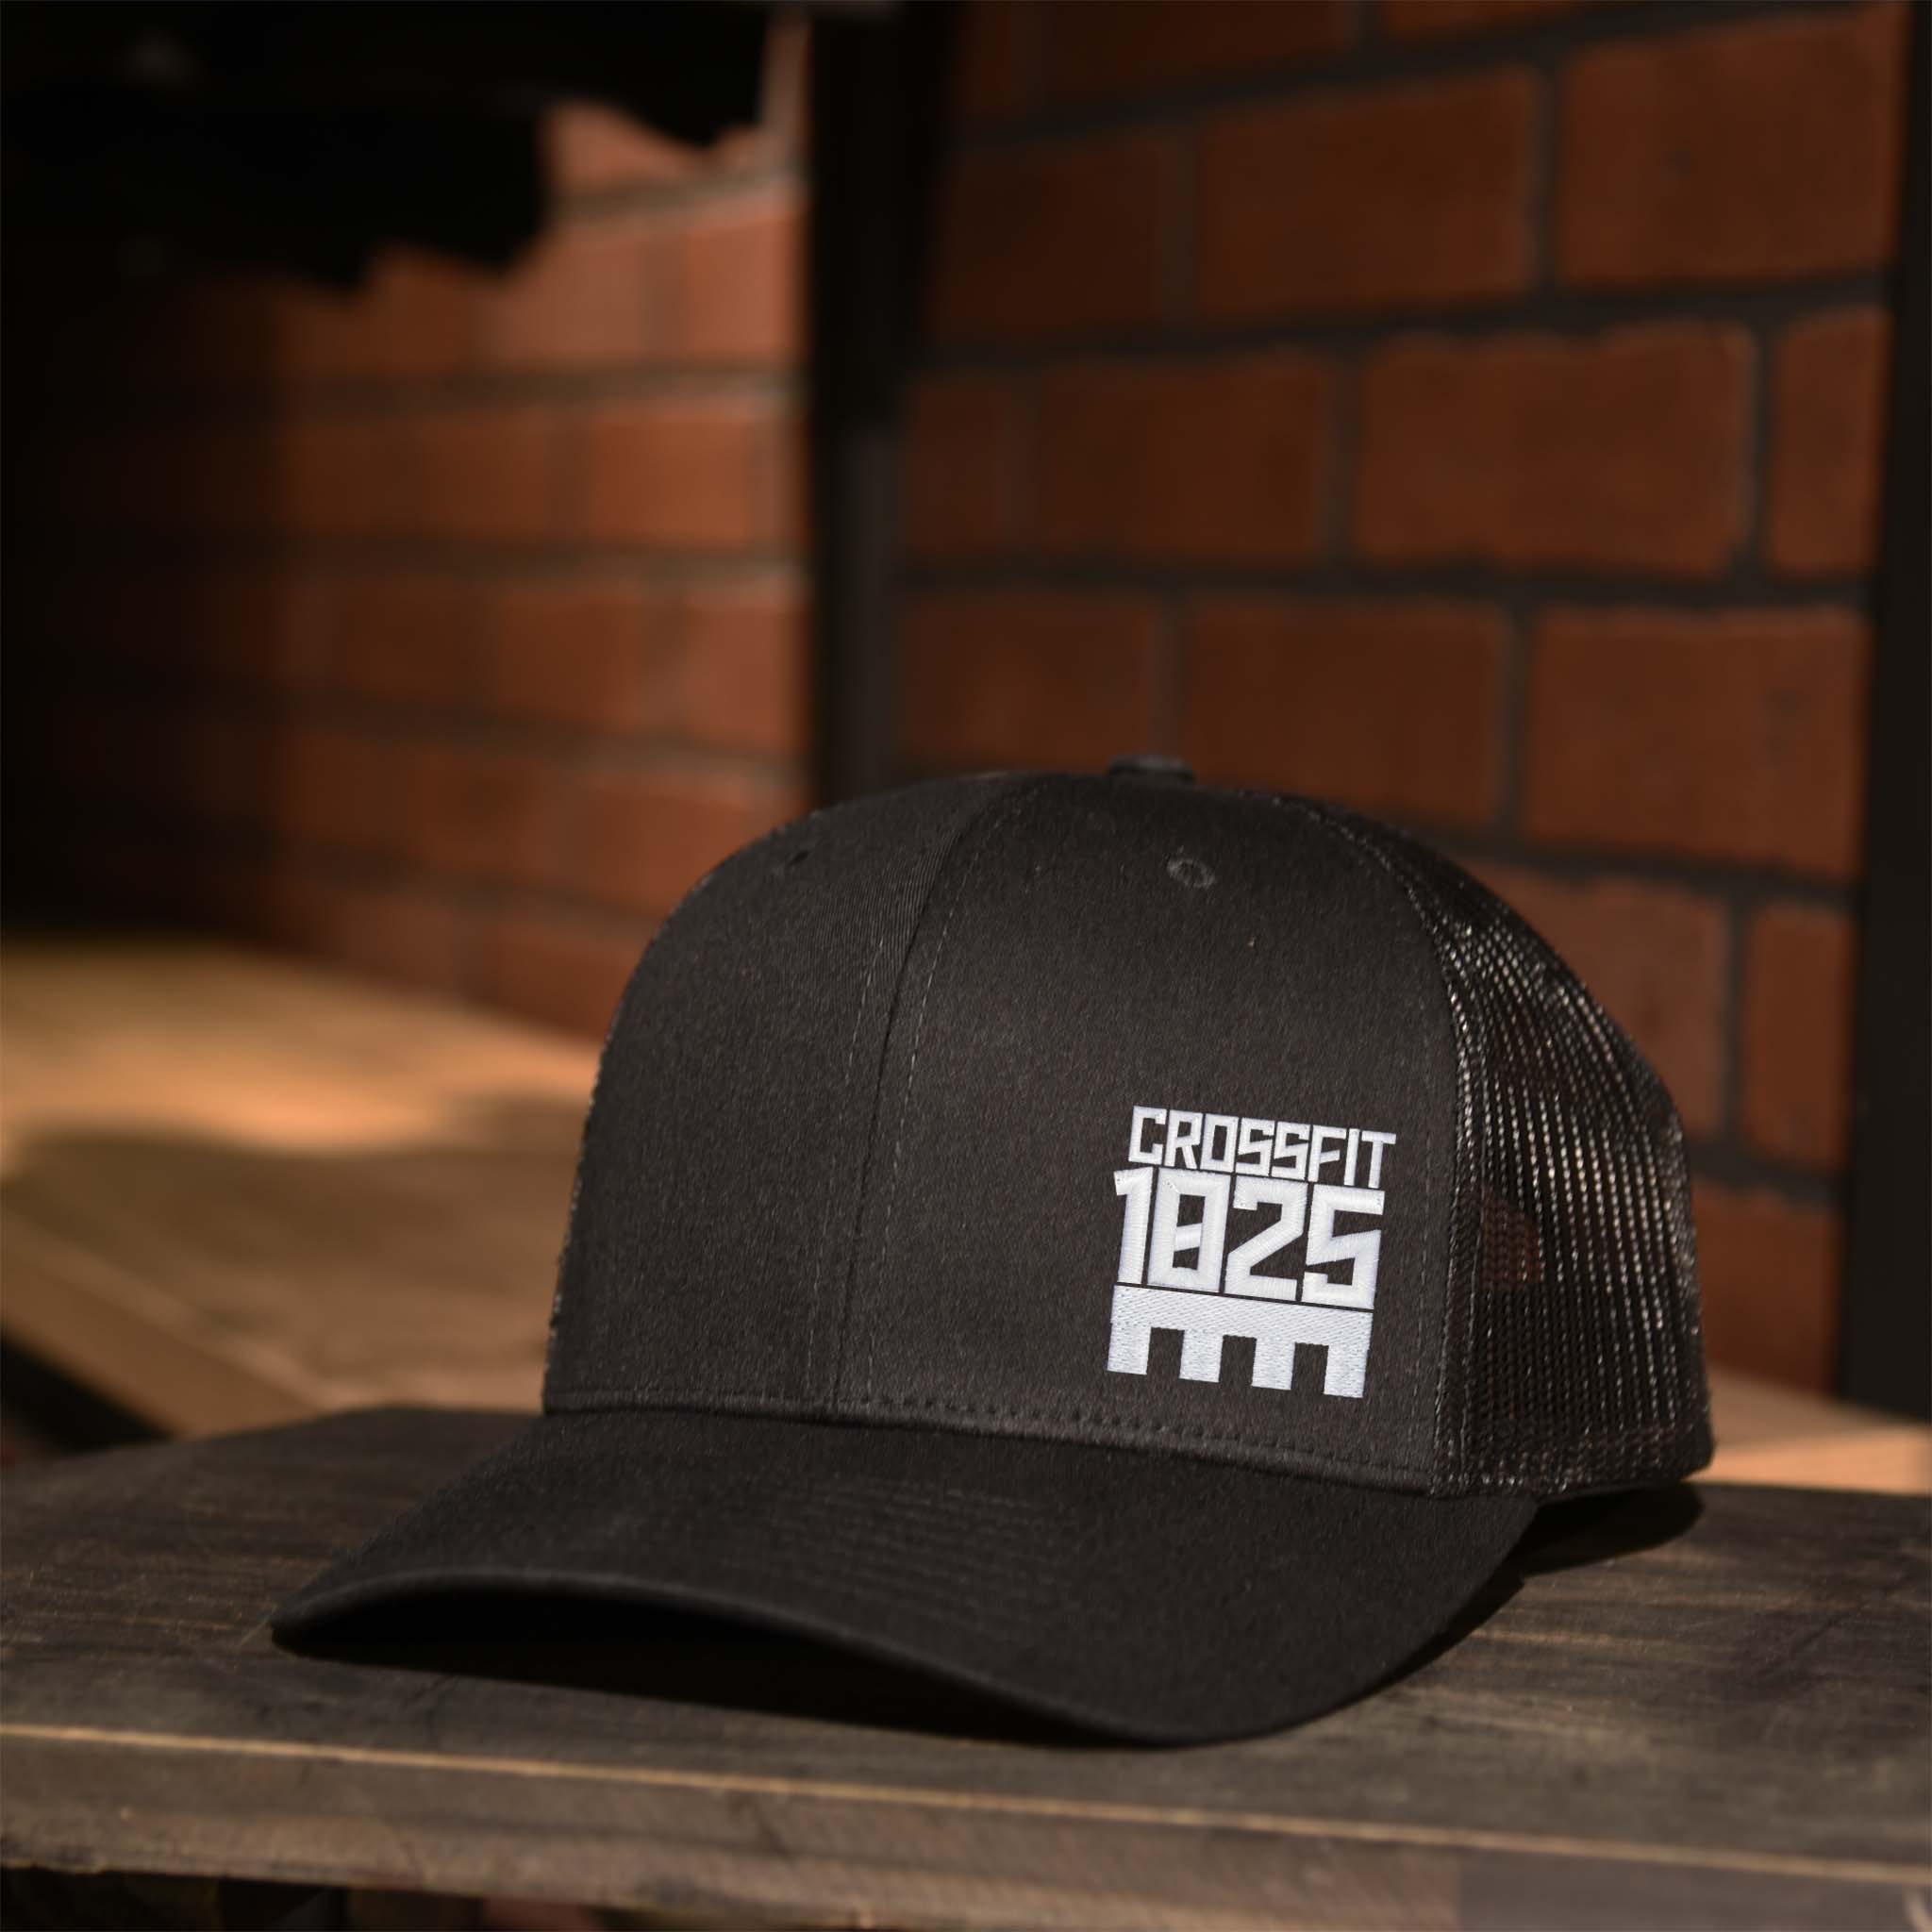 CrossFit 1825 White Embroidered Logo Trucker Hat in all Black